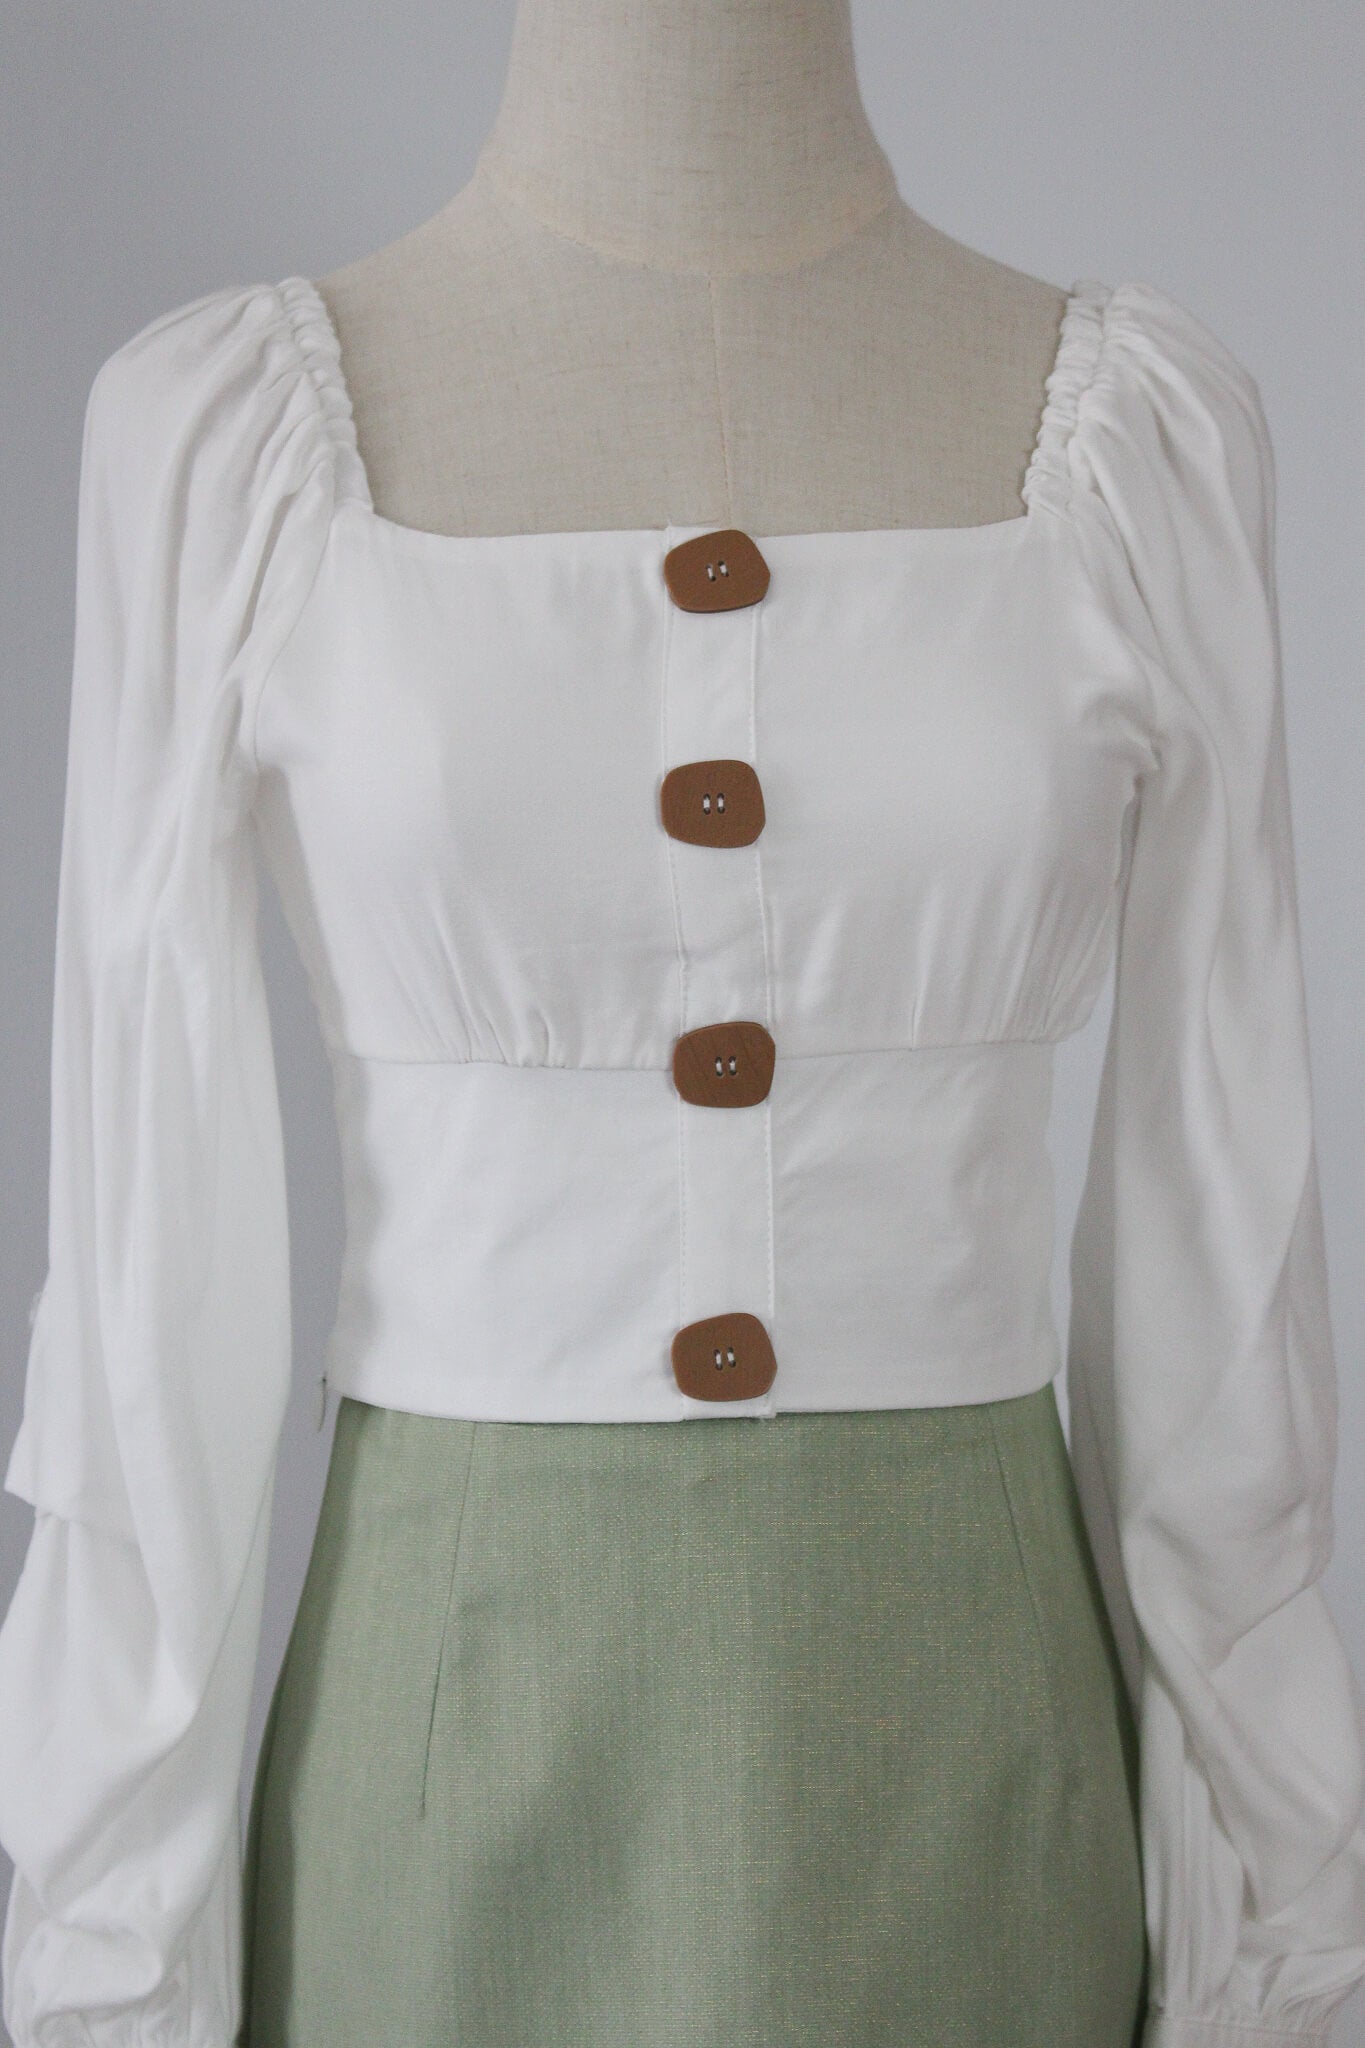 A square neck cropped top with long puffed sleeves. Complete with wooden finish buttons. 